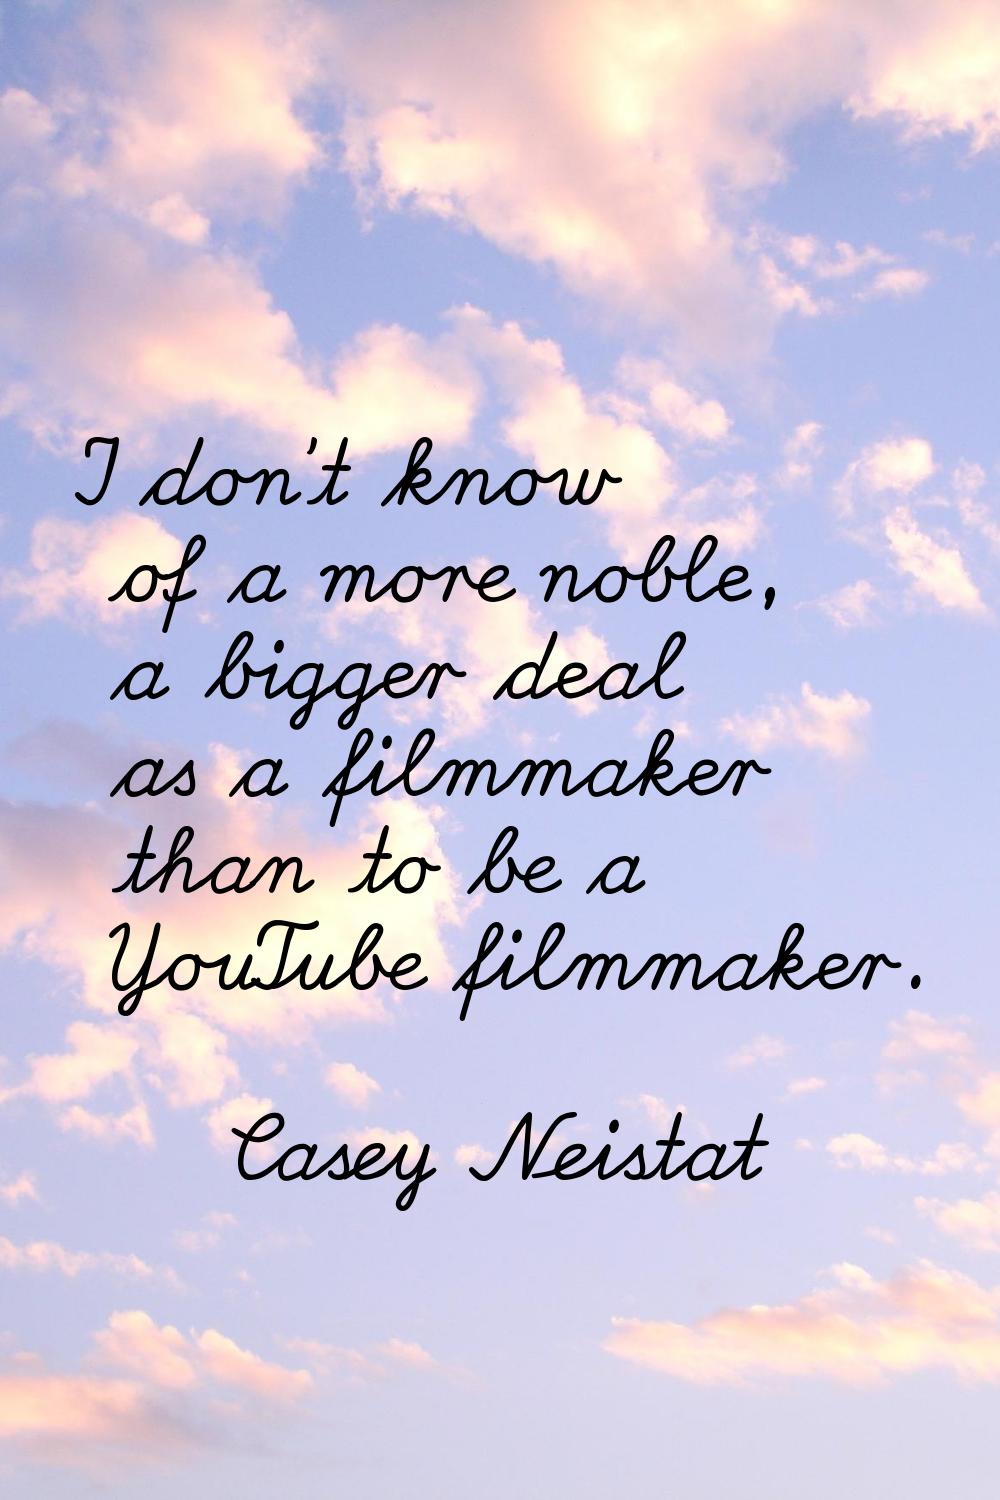 I don't know of a more noble, a bigger deal as a filmmaker than to be a YouTube filmmaker.